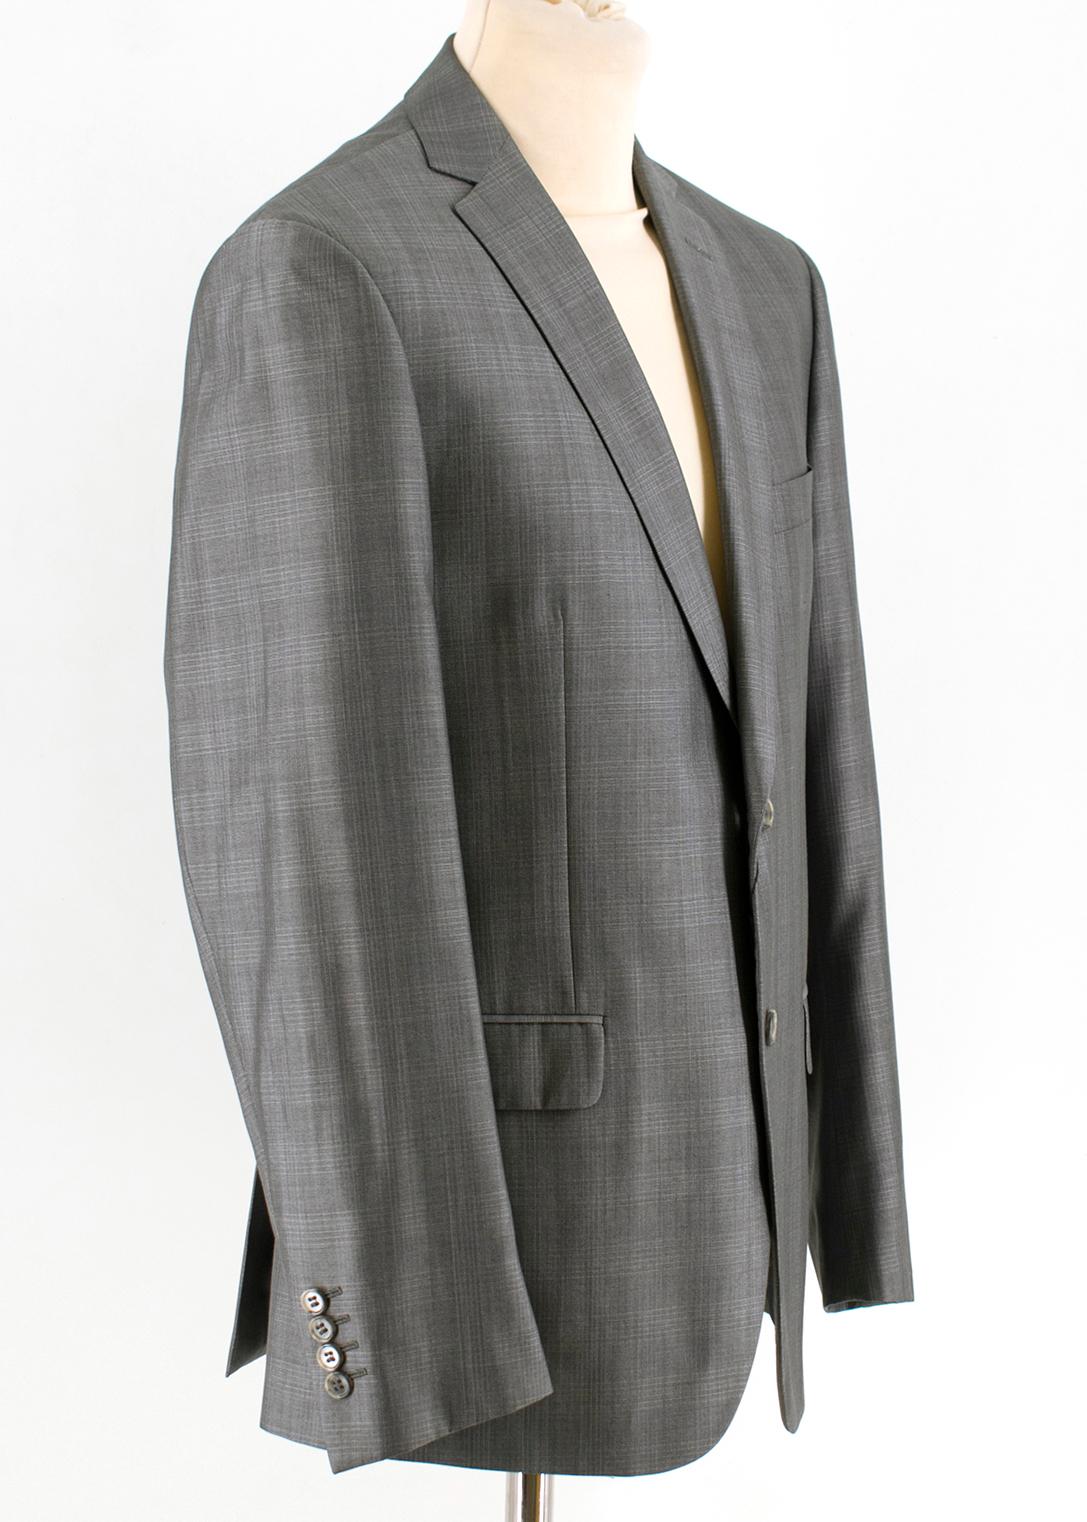 Balmain Men's Grey Check Slim Fit Suit

full blazer lining;
part trousers lining;
button, zip, hook and bar trousers closure;
three pocket style blazer;
four interior blazer pockets;

Please note, these items are pre-owned and may show signs of